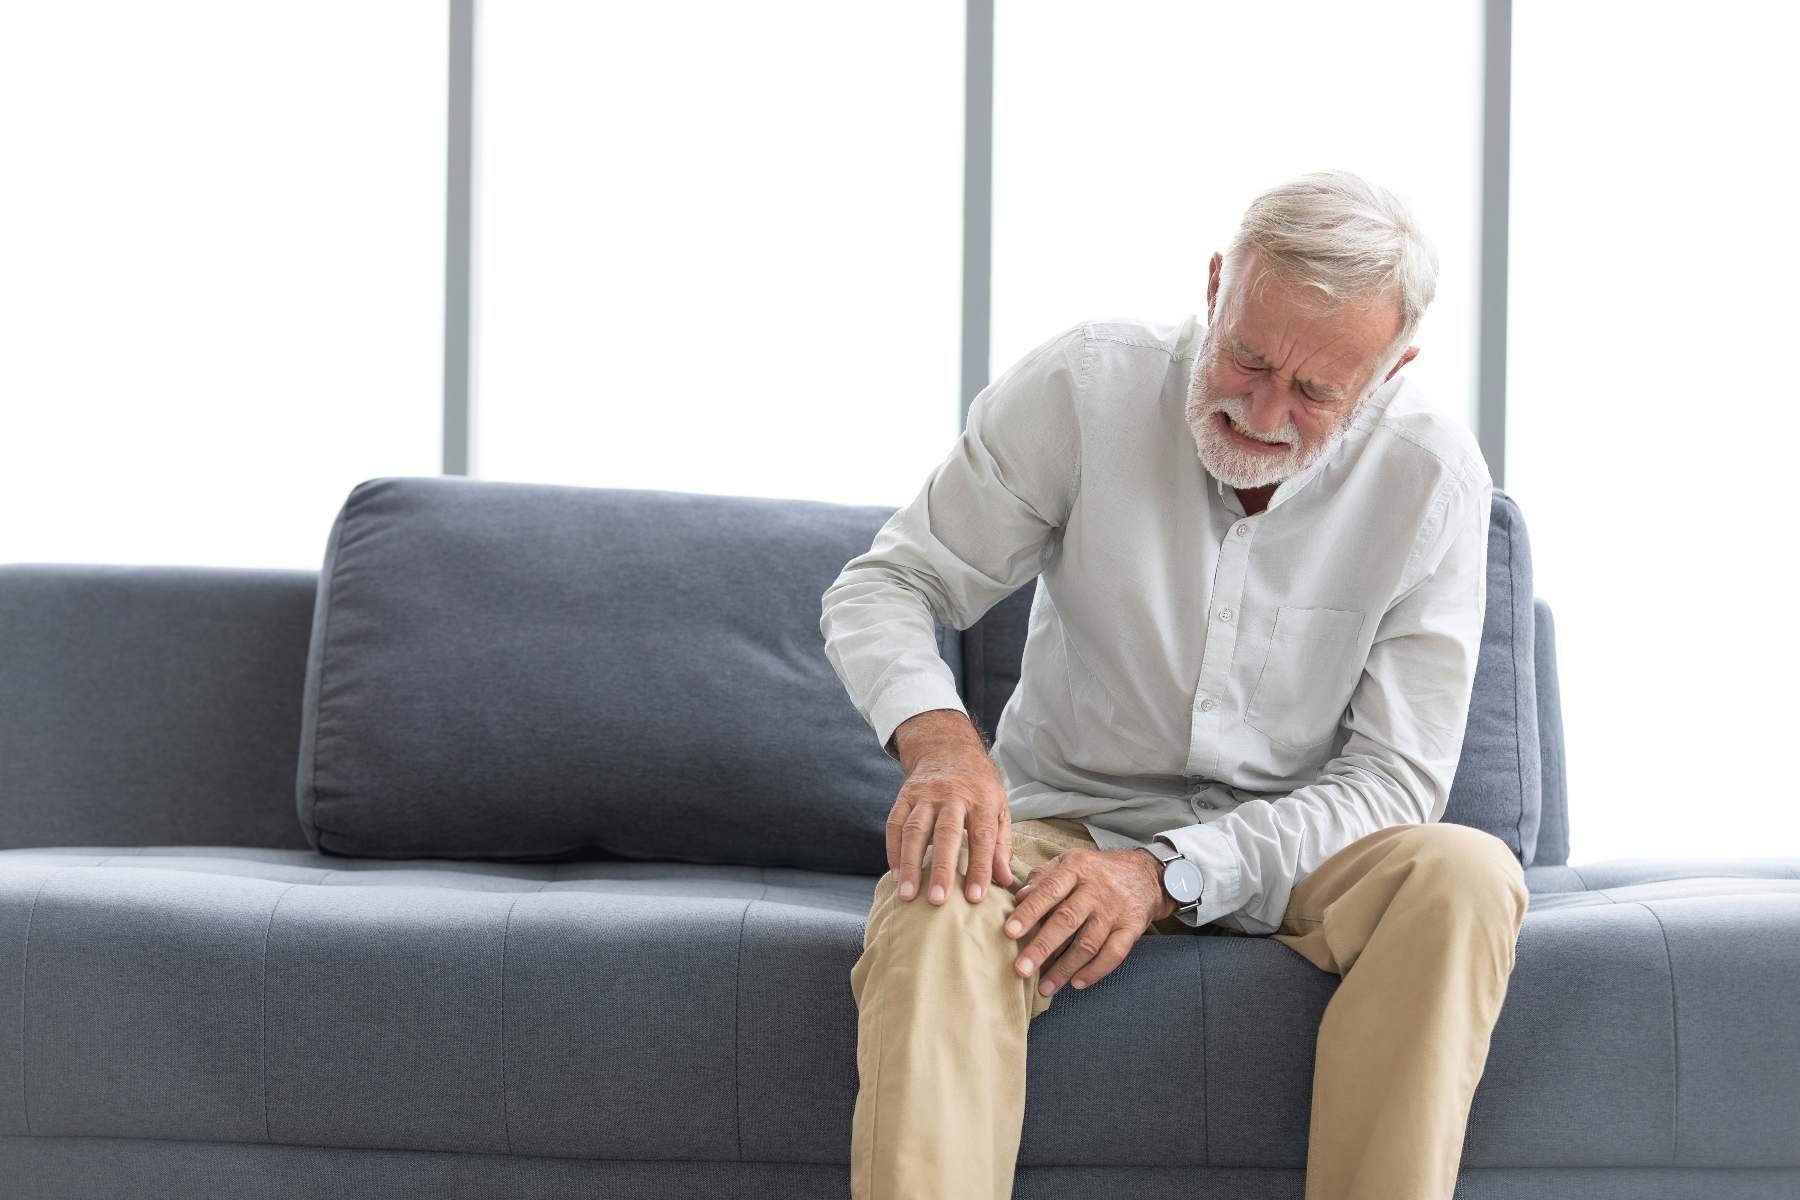 When to have a Painful Knee Replacement Evaluated